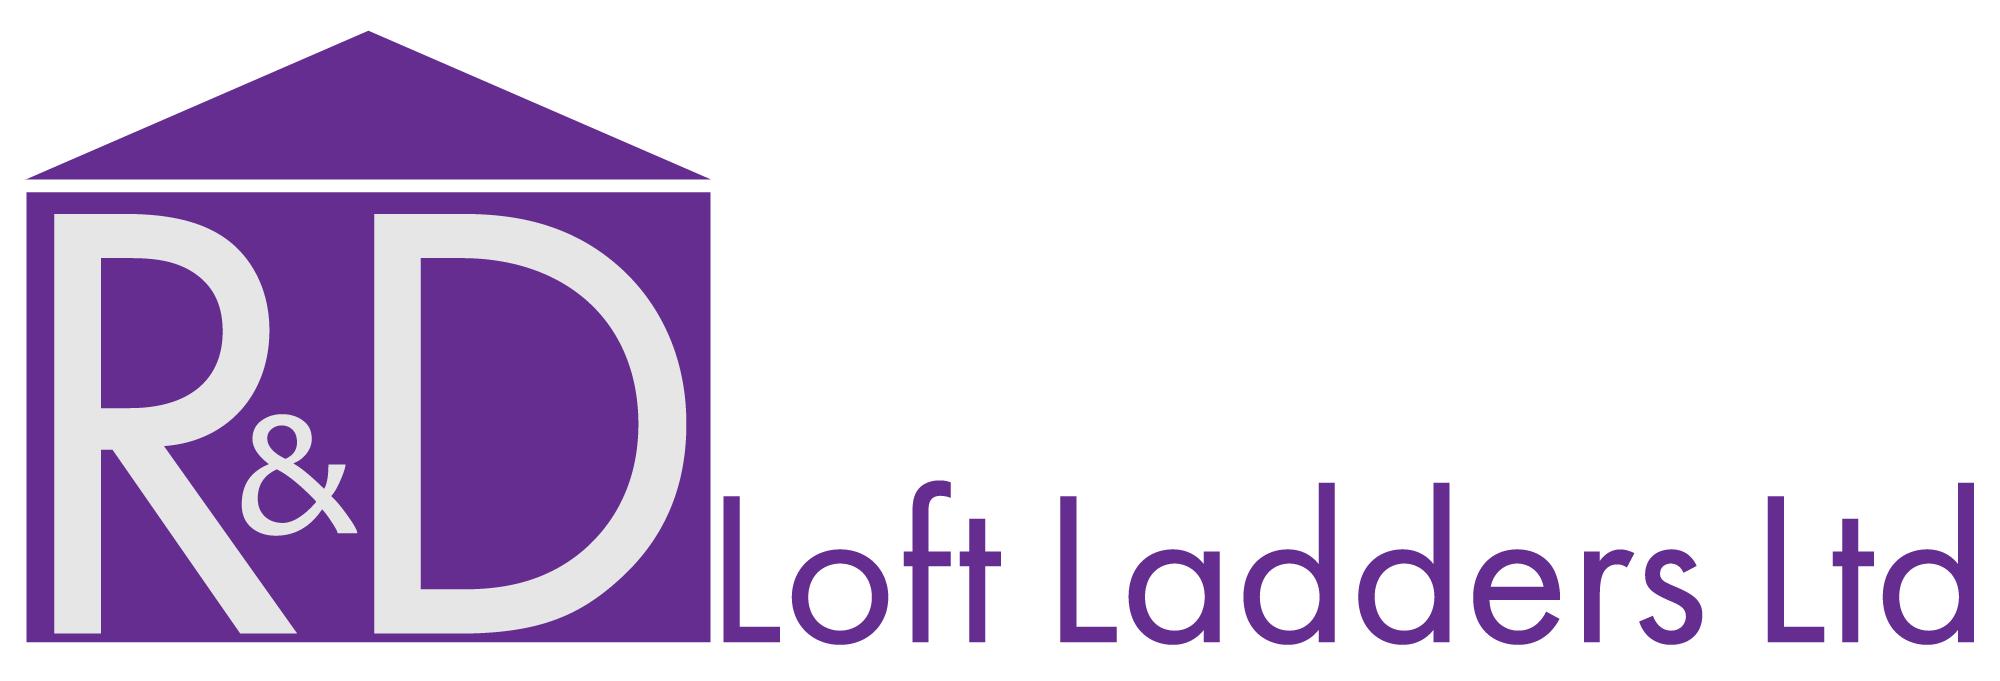 Glasgow Loft Ladders, R & D Loft Ladders are a family run business covering Glasgow, Edinburgh and all areas of Scotland.